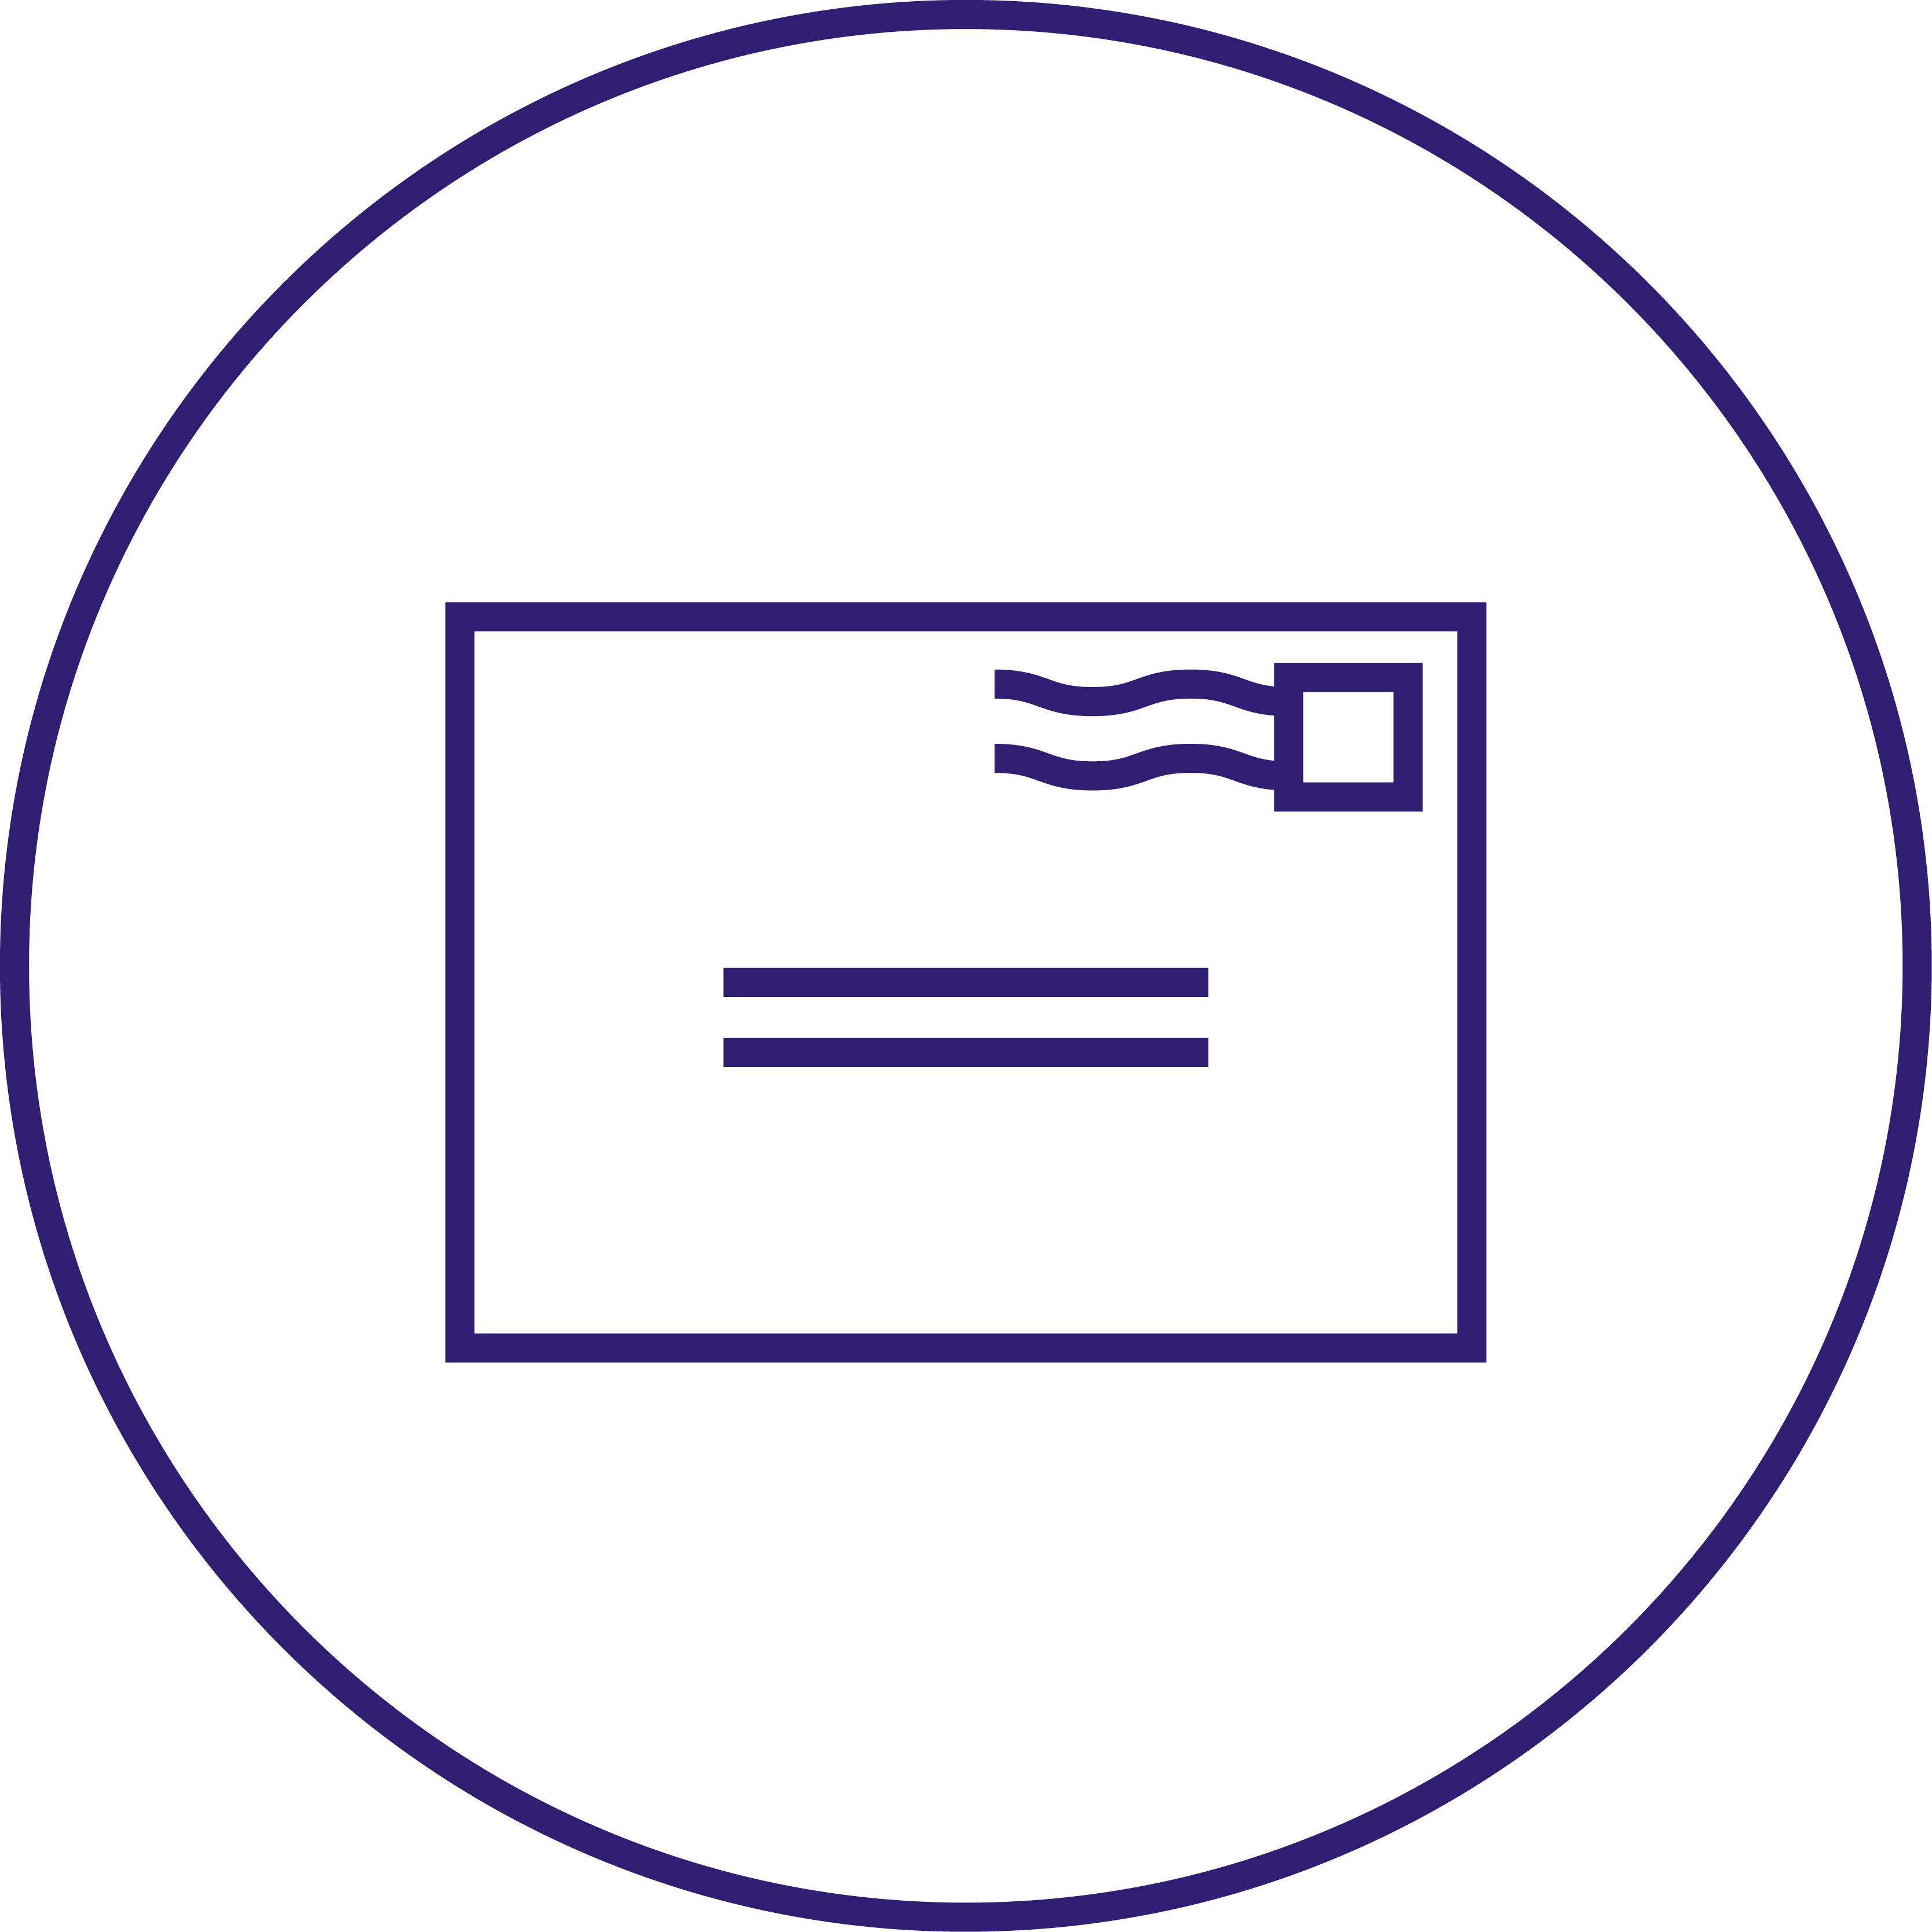 icon containing a letter with postage and wavy motion lines inside a purple circle